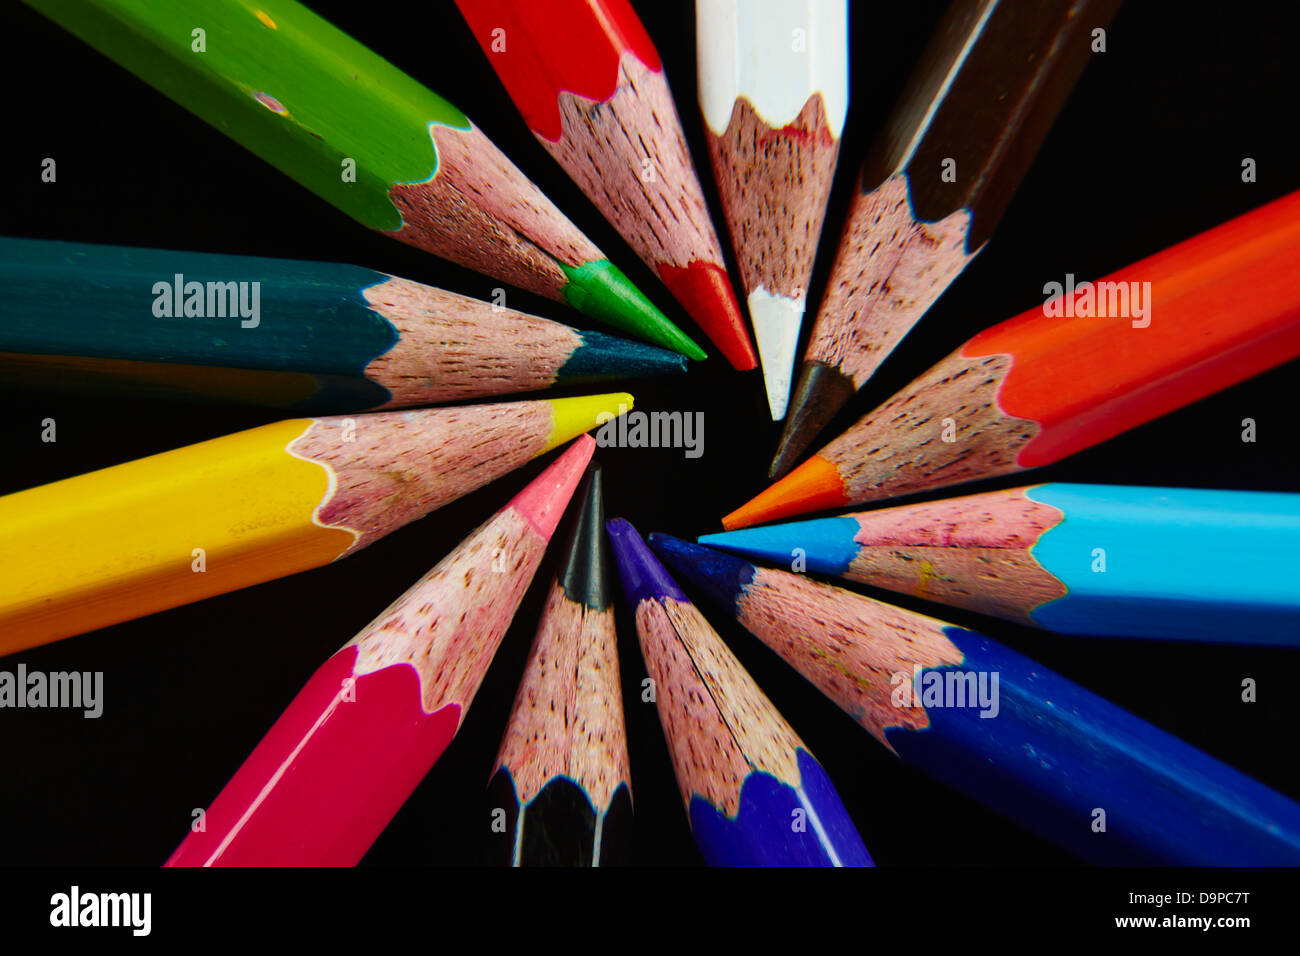 Coloured pencils in a circle Stock Photo